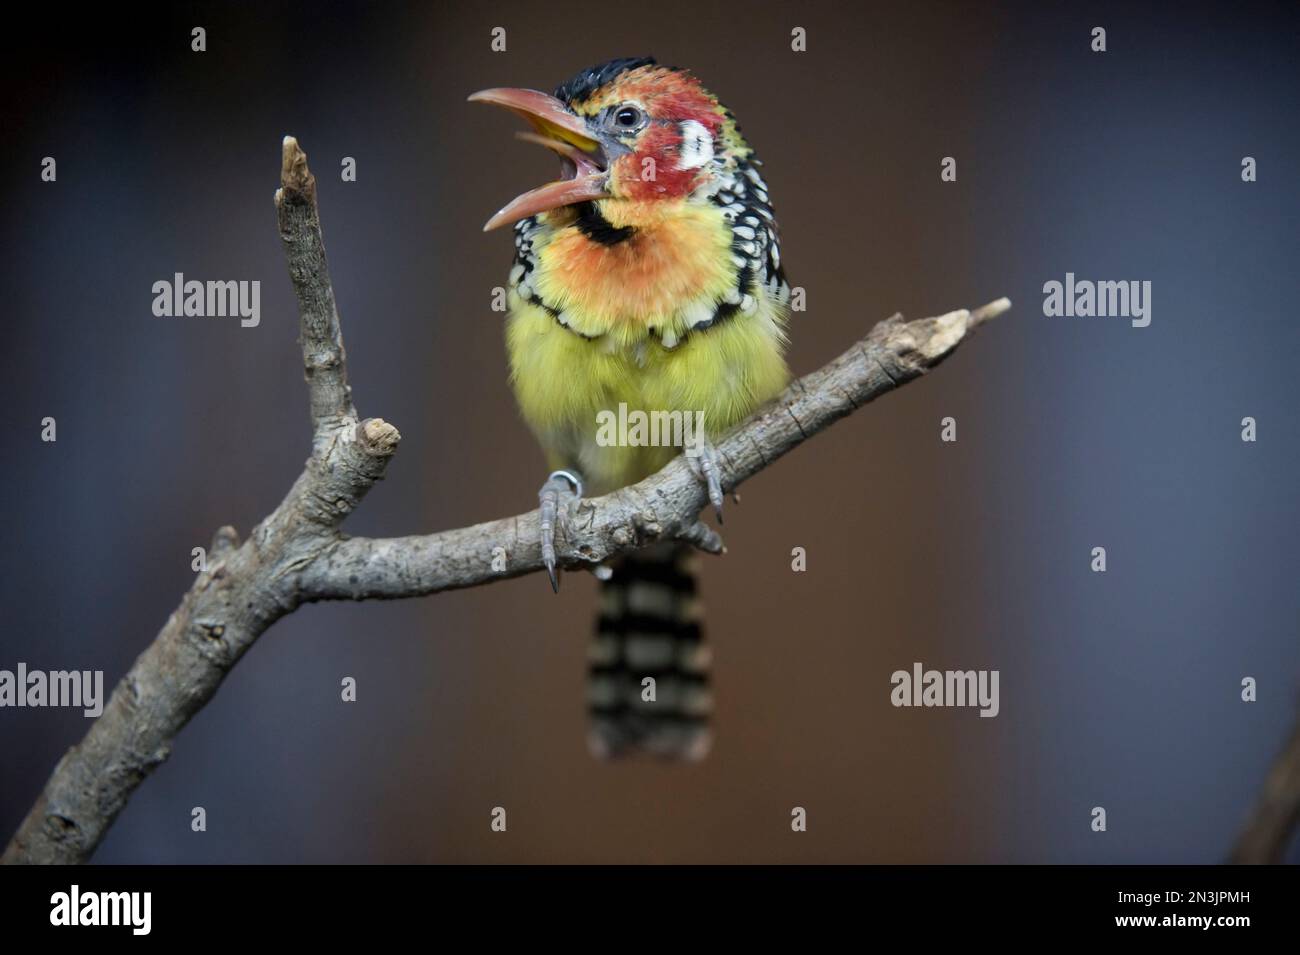 Portrait of a Red and yellow barbet (Trachyphonus erythrocephalus) perched on a branch in a zoo; San Antonio, Texas, United States of America Stock Photo